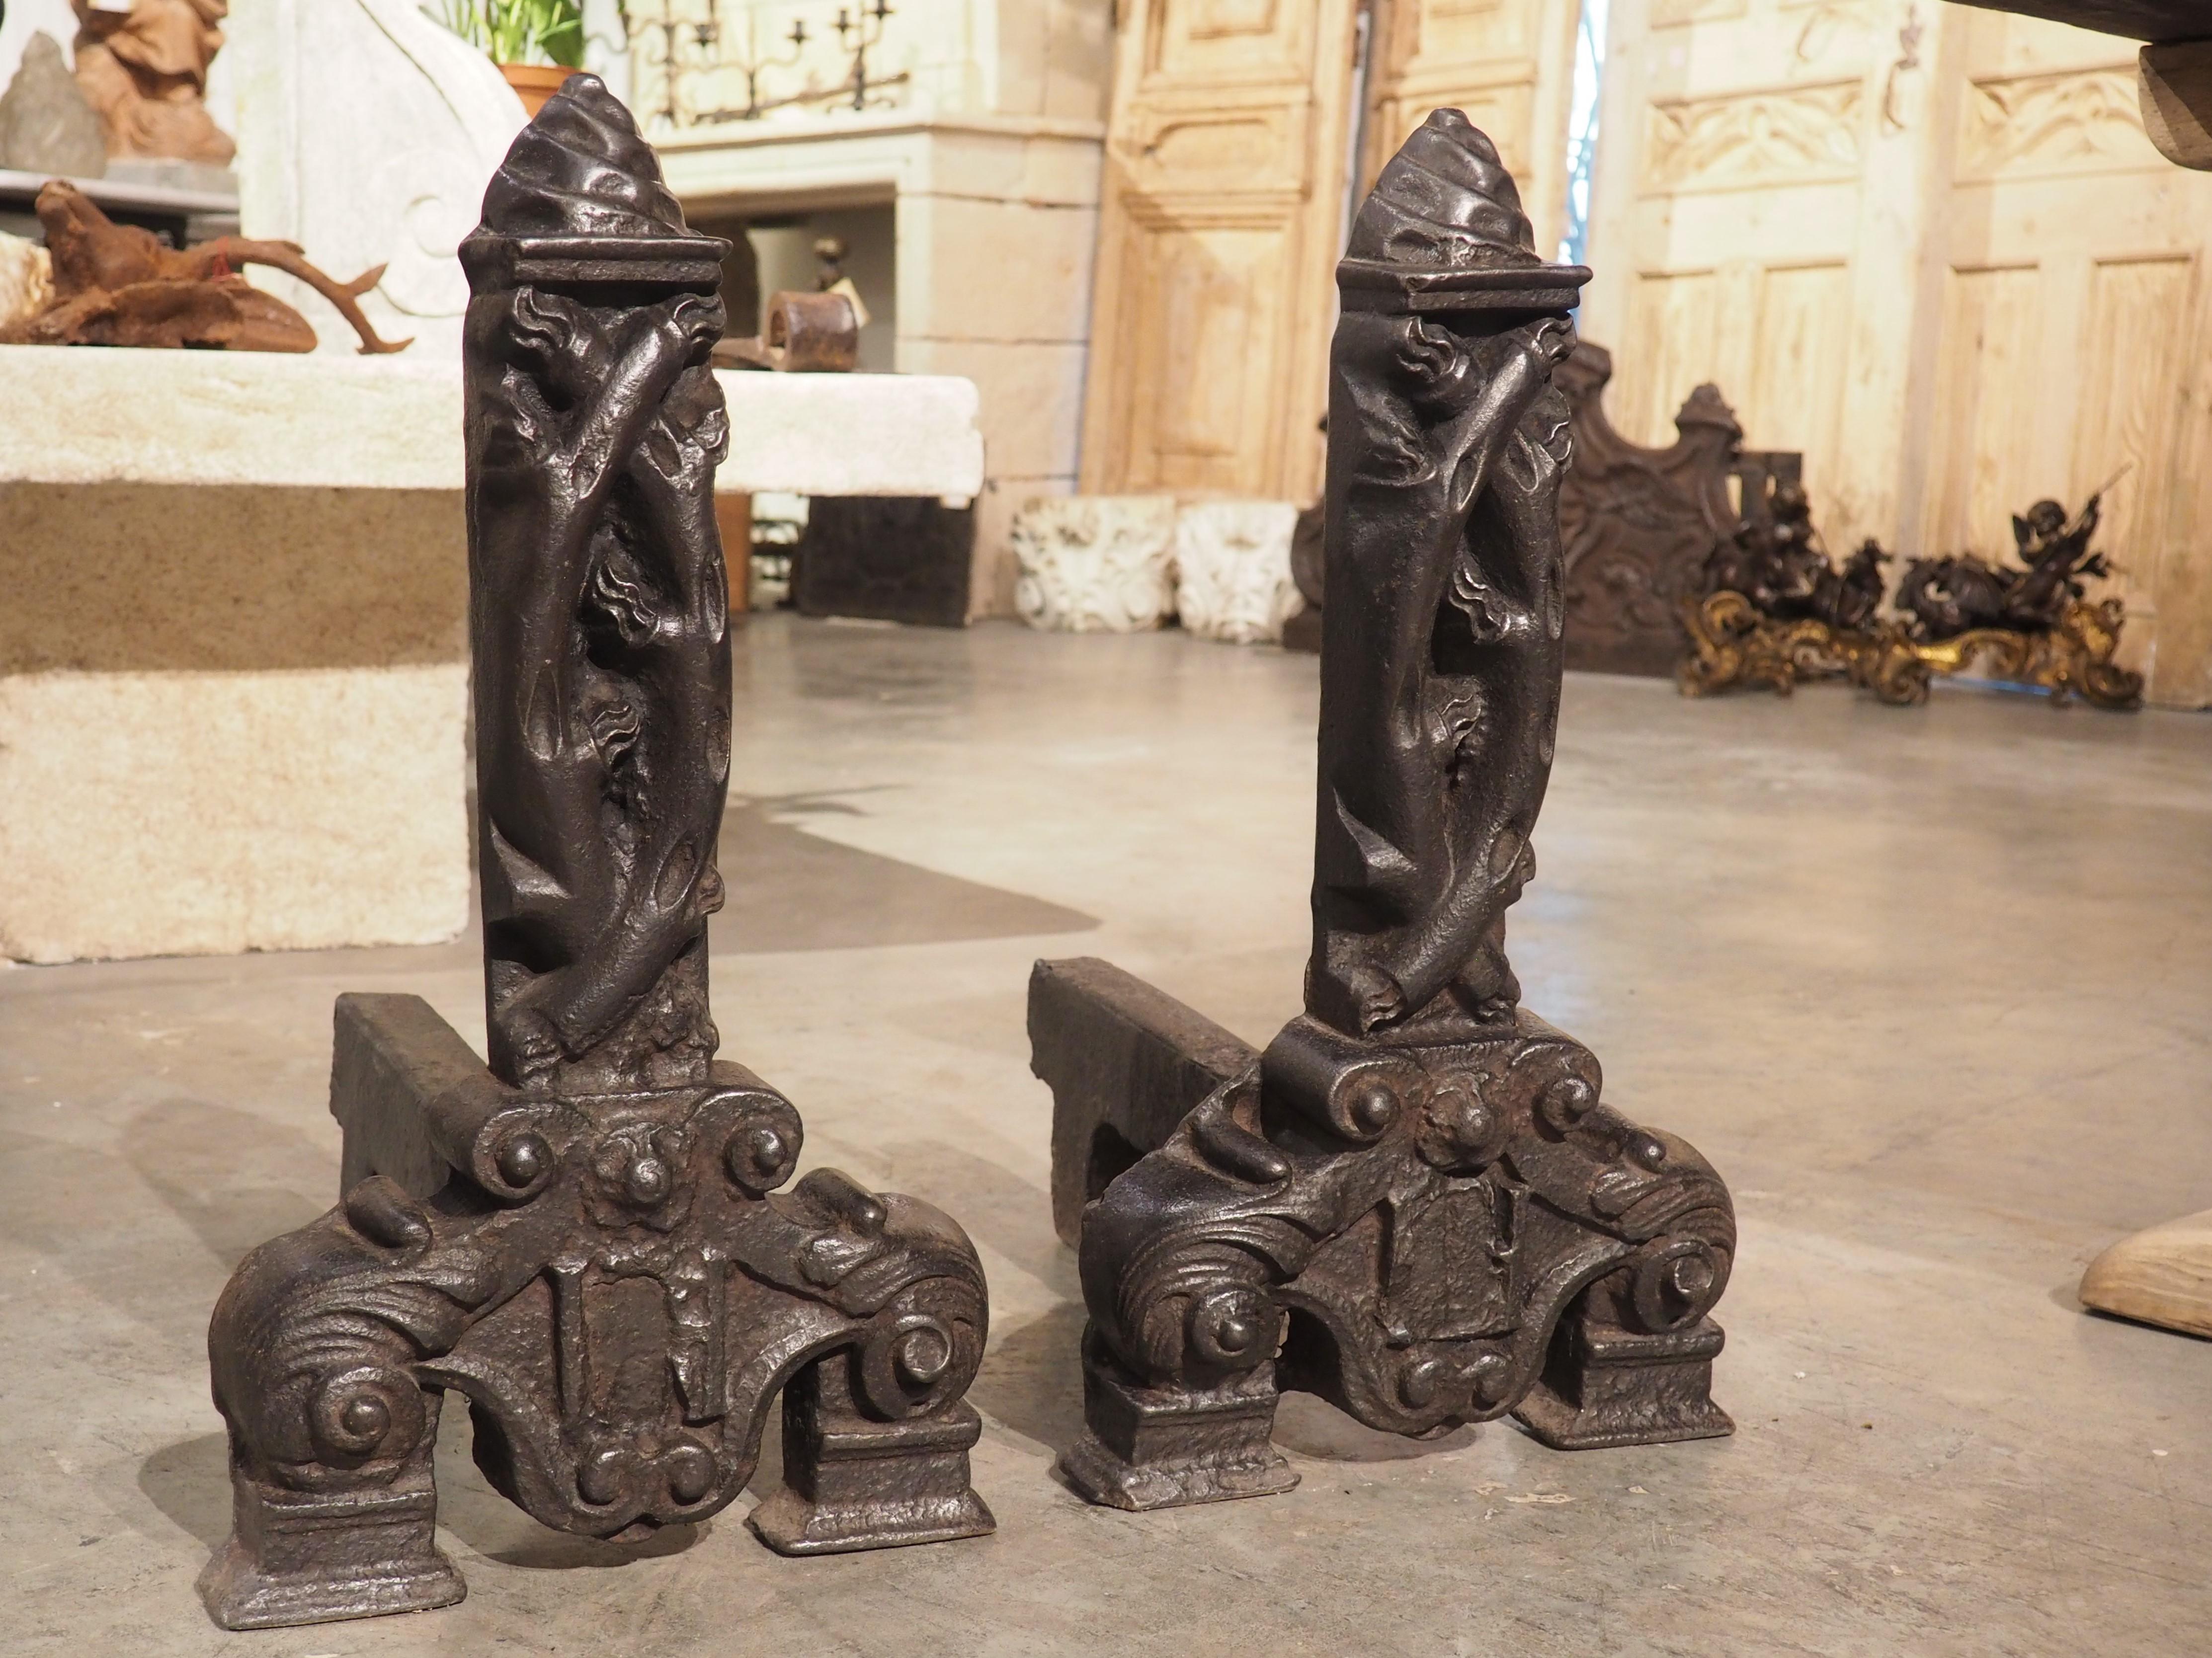 These fireplace chenets are a wonderful example of French “haute epoque” iron work. They are estimated to have been created in the early 16th century. The artistic nature and high quality of the iron work indicate they would have been created for an